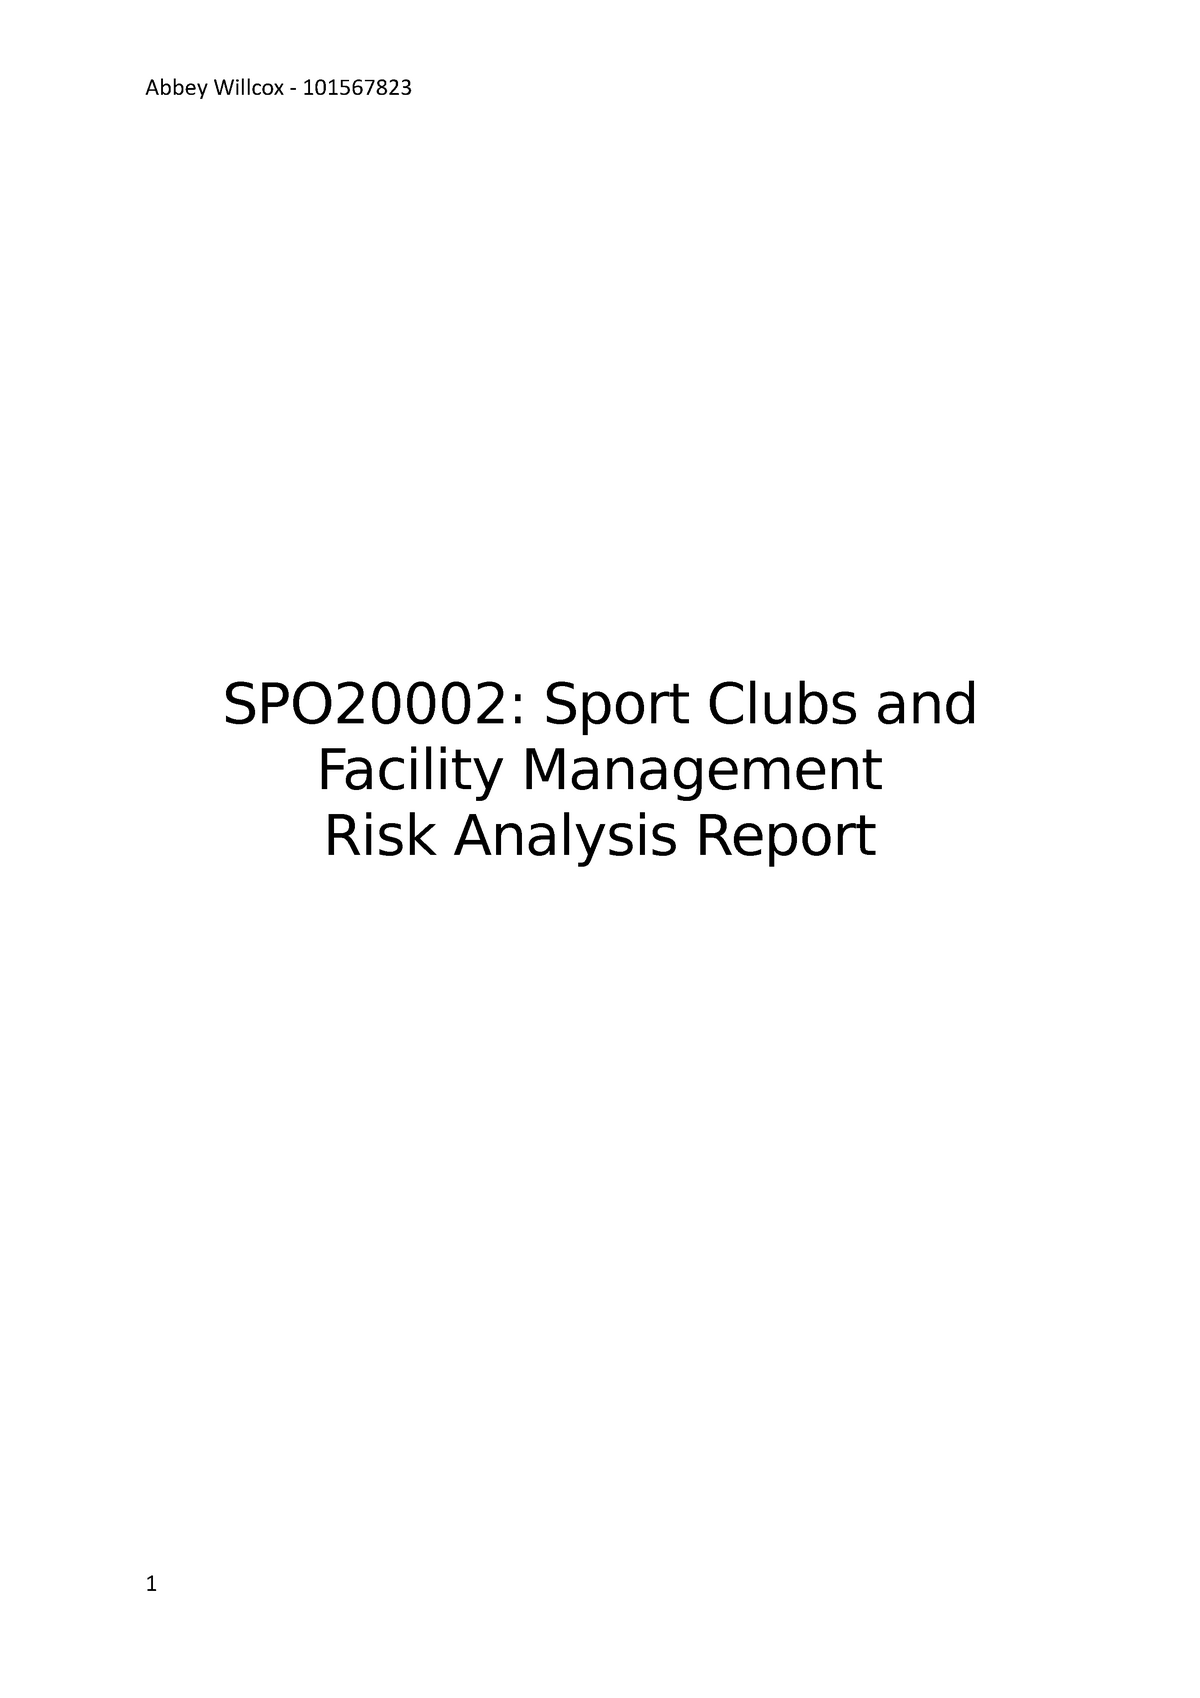 risk analysis for a sport facility